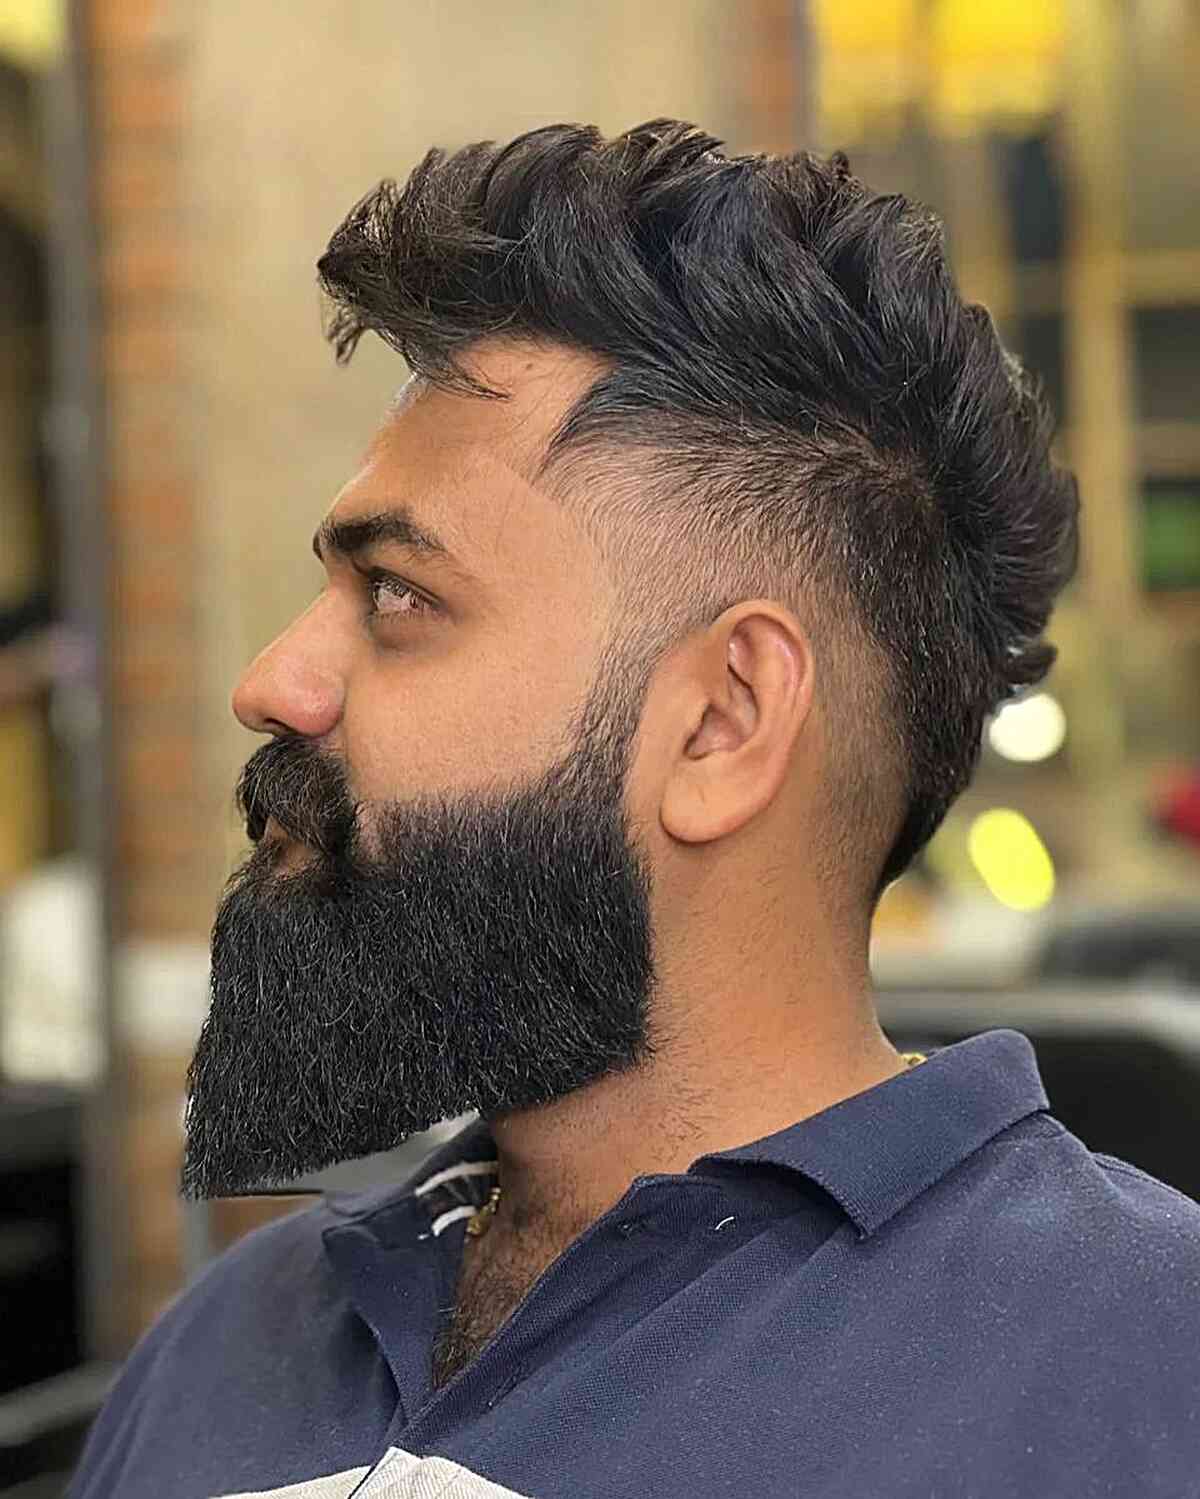 20 Hairstyles For Men With Long Hairs To Look Cool-smartinvestplan.com